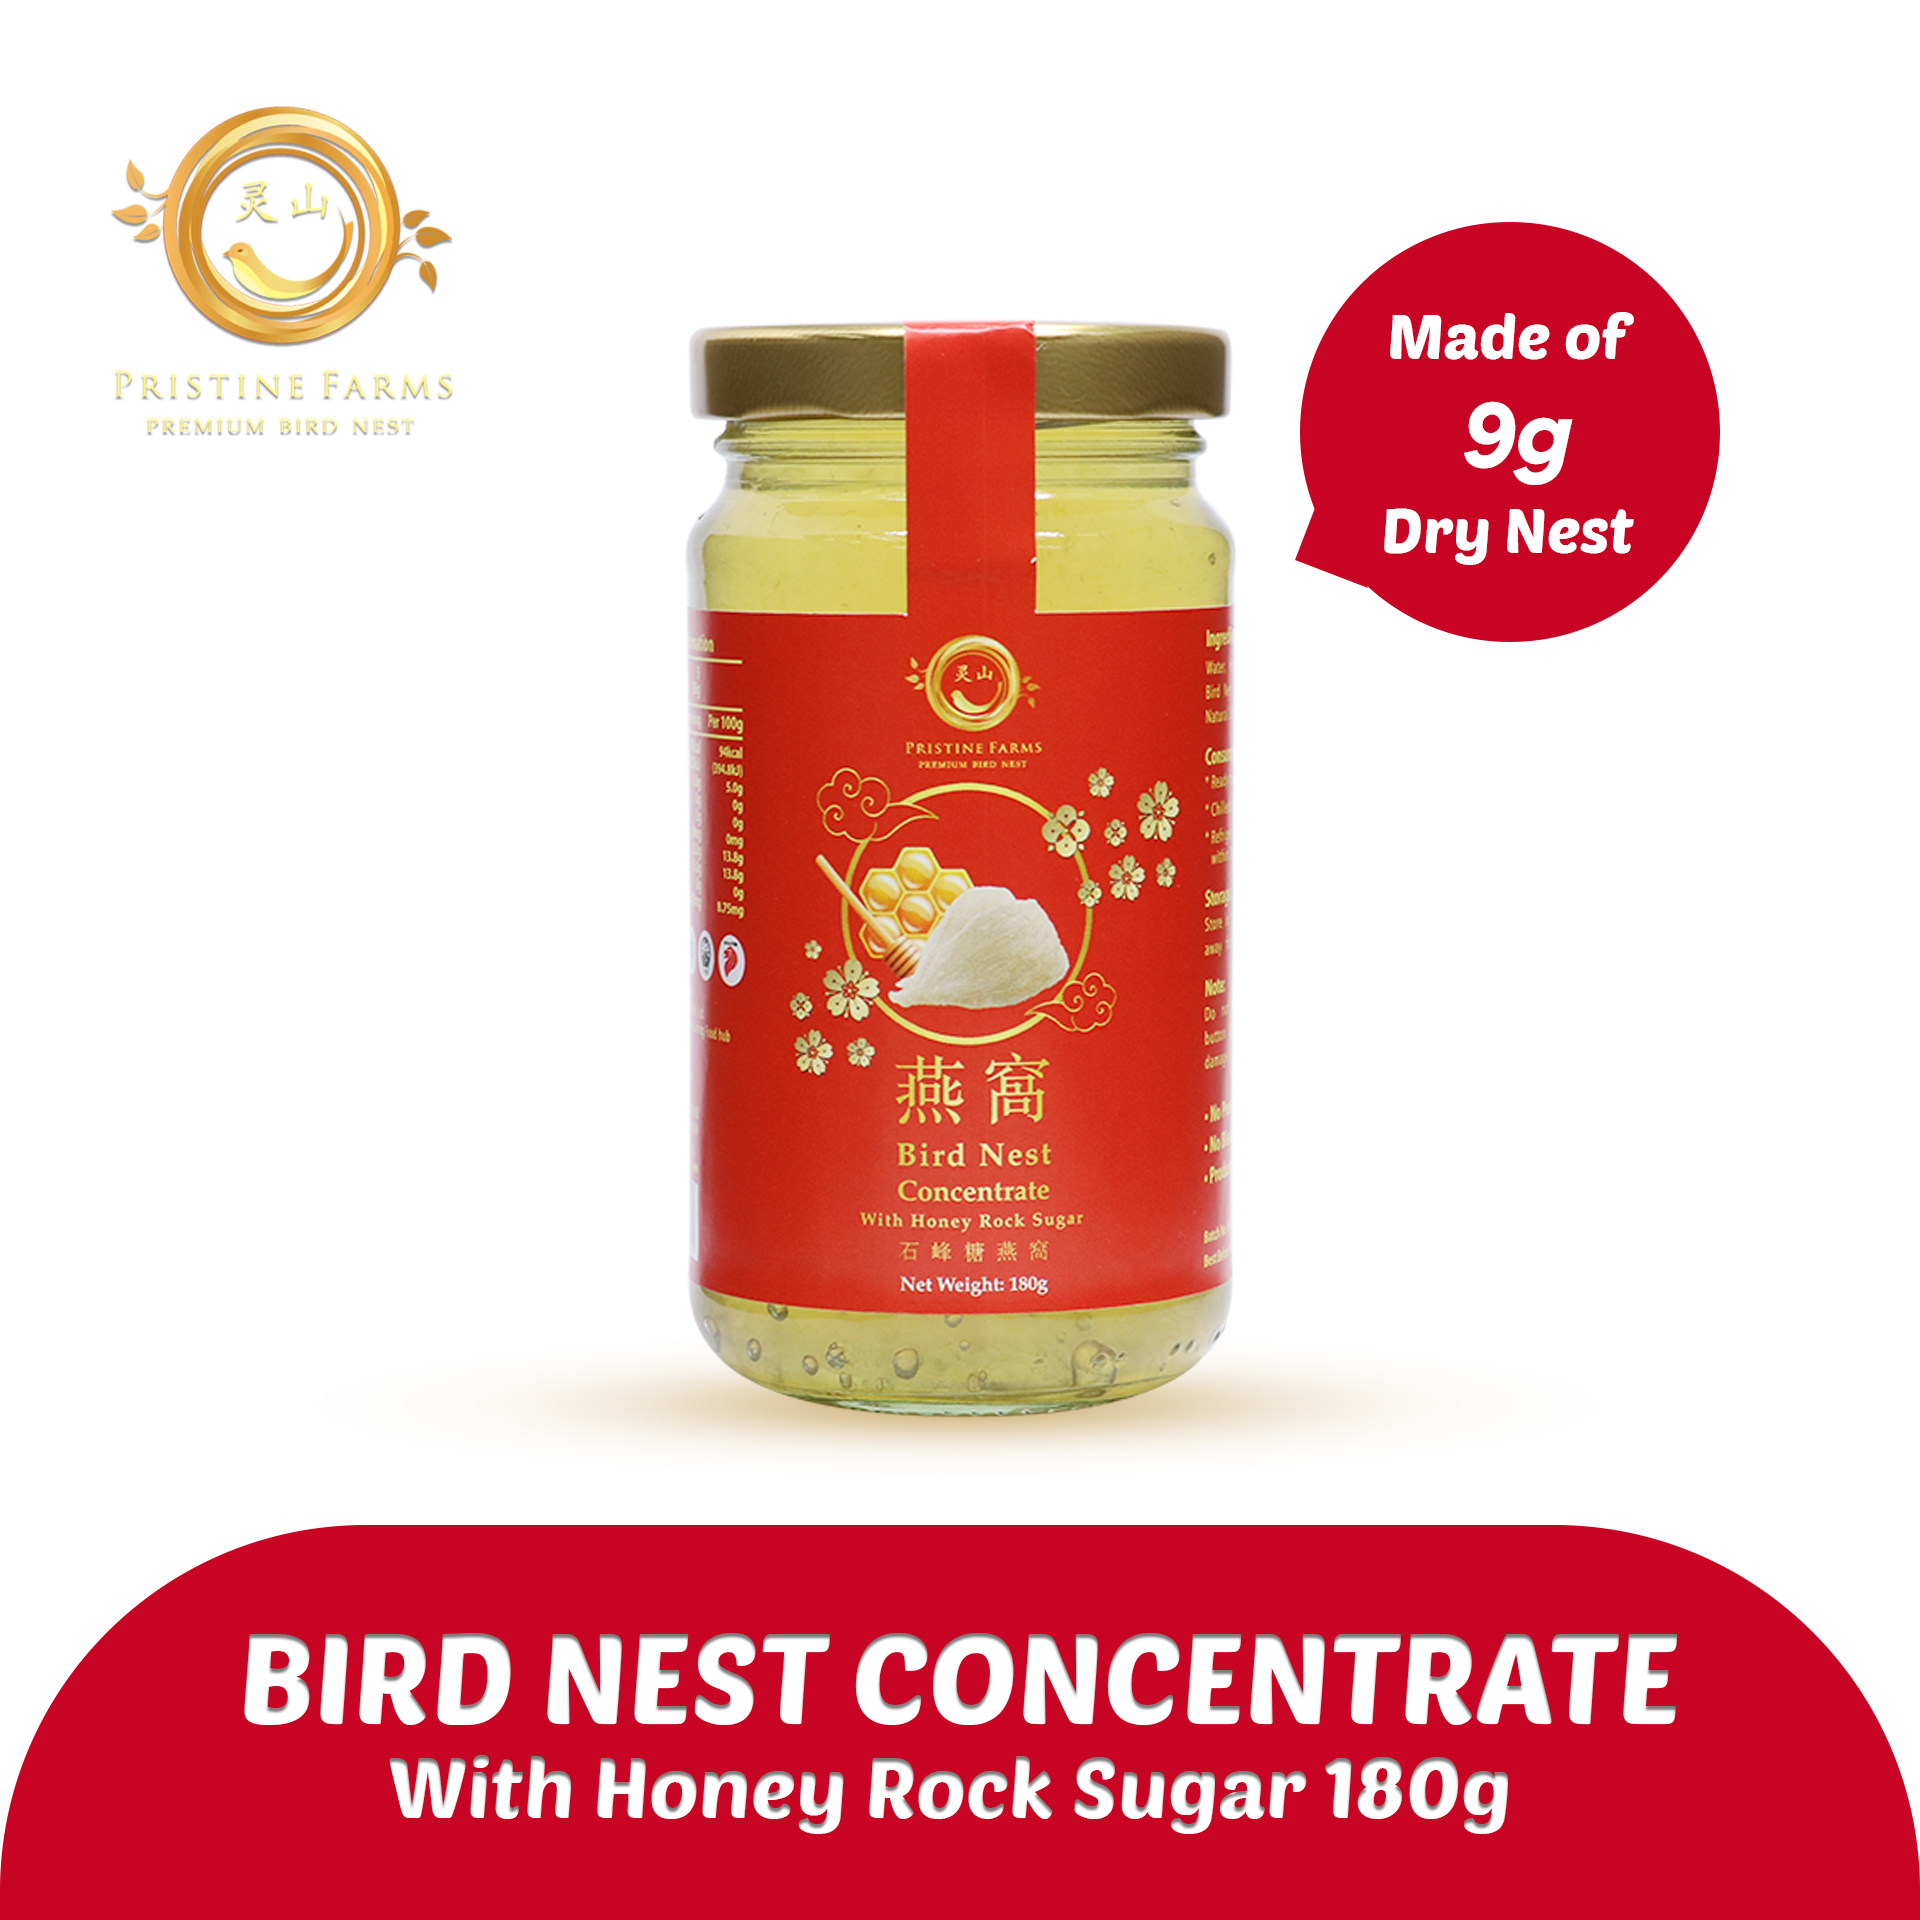 baby-fair Pristine Farm Bird Nest Concentrate with Generous 9g of Dry Nest - 180g Big Bottle